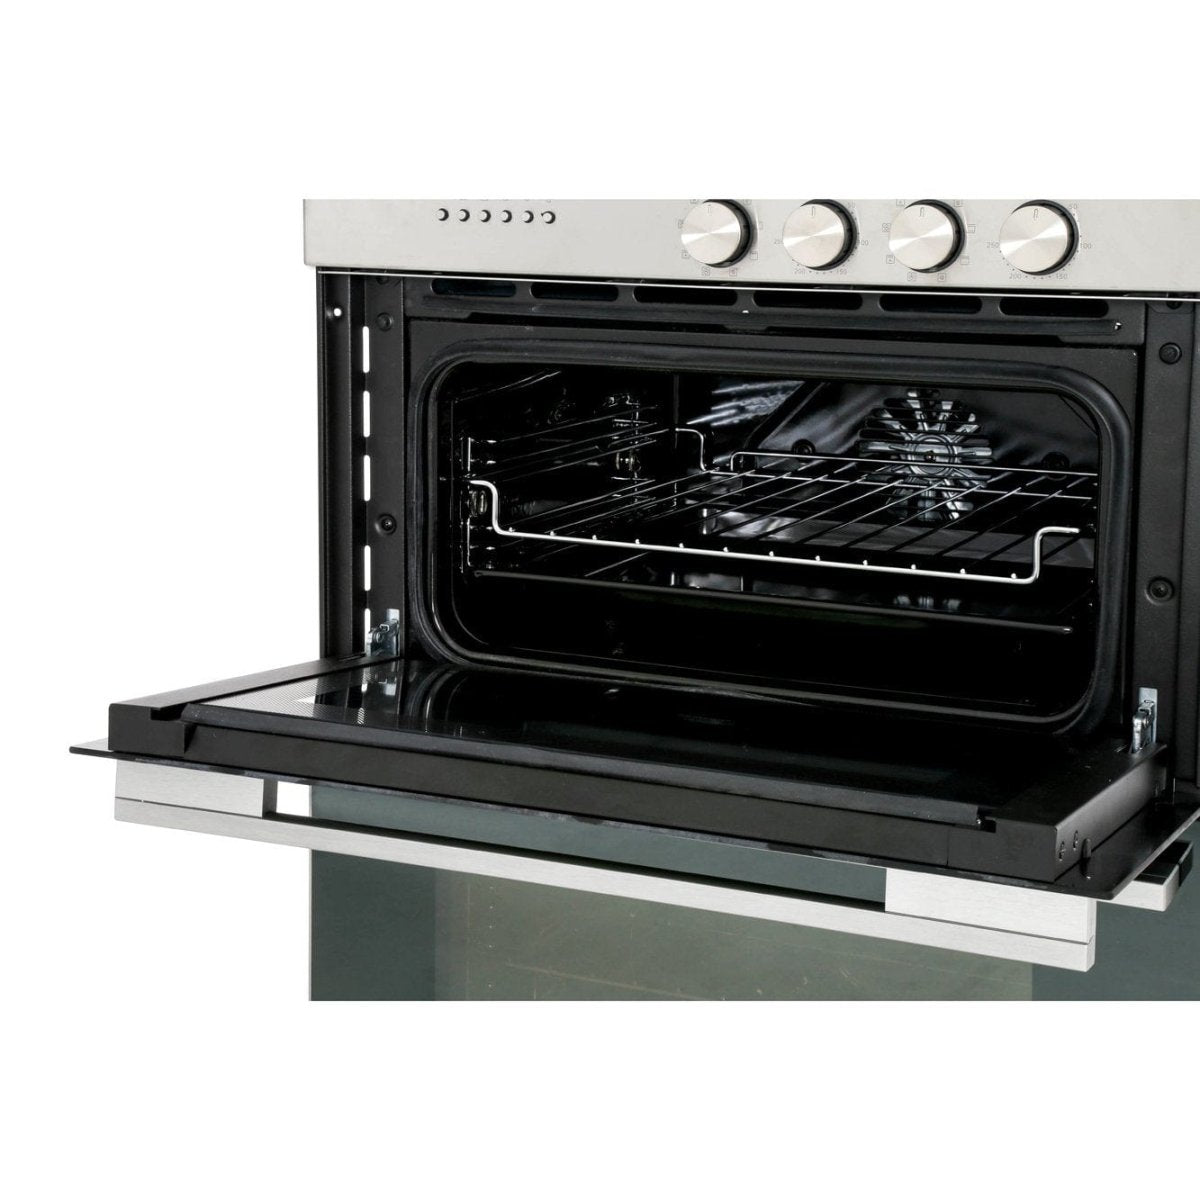 Fisher & Paykel Designer OB60B77CEX3 Built In Electric Double Oven - Black - Stainless Steel - Atlantic Electrics